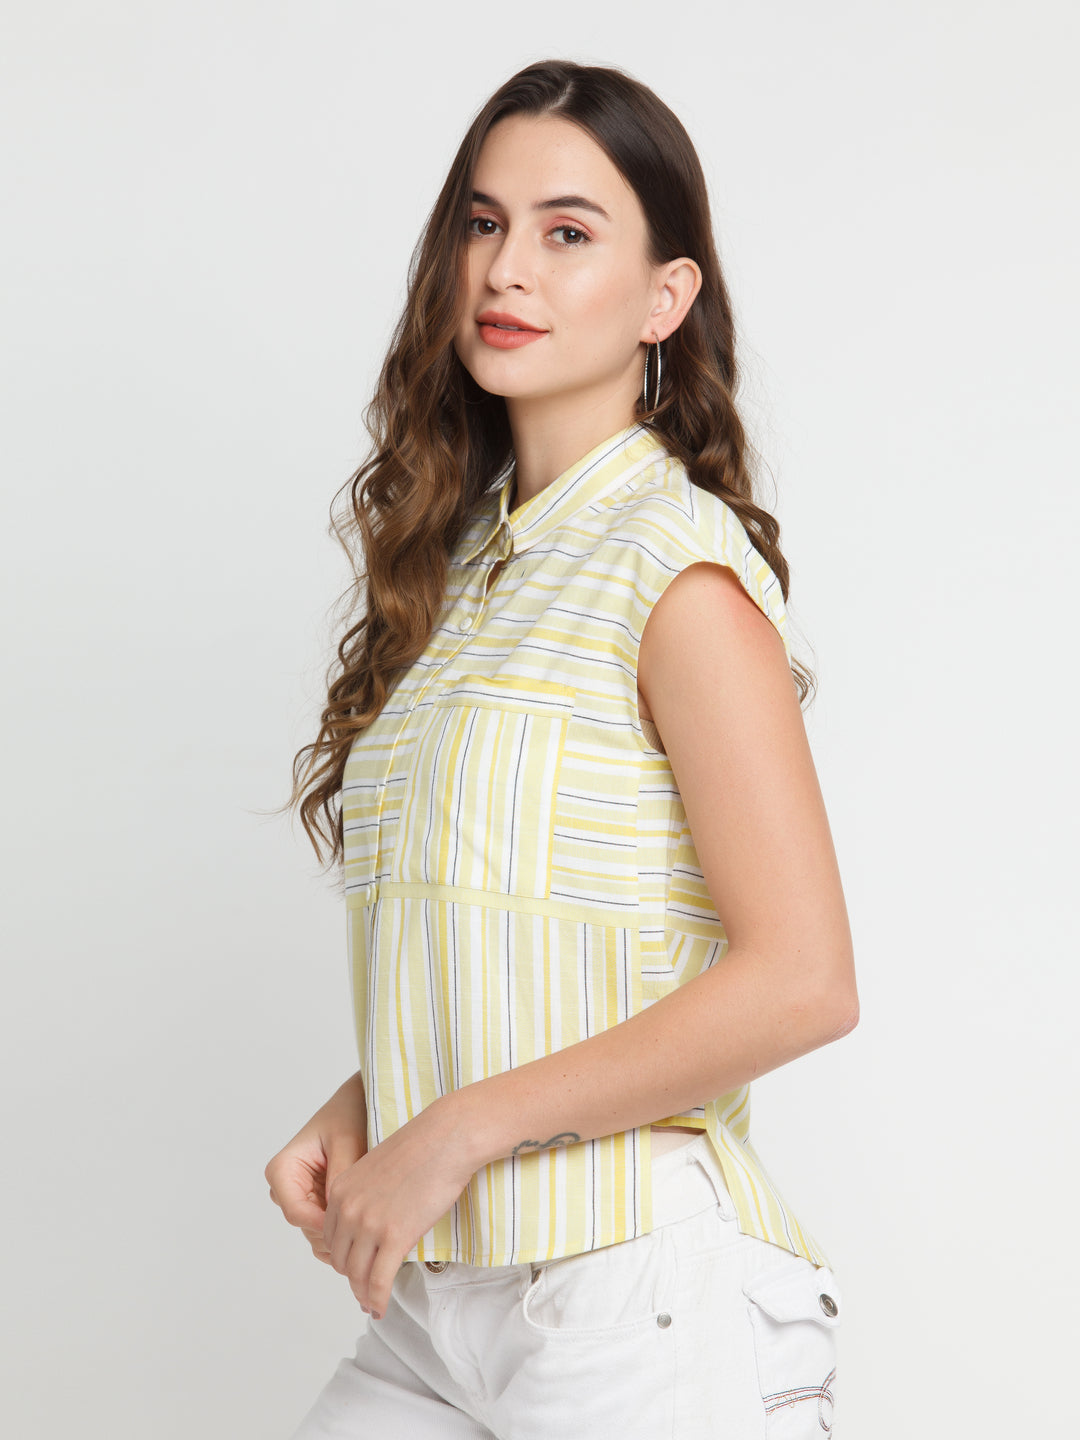 Off White Striped Shirt For Women